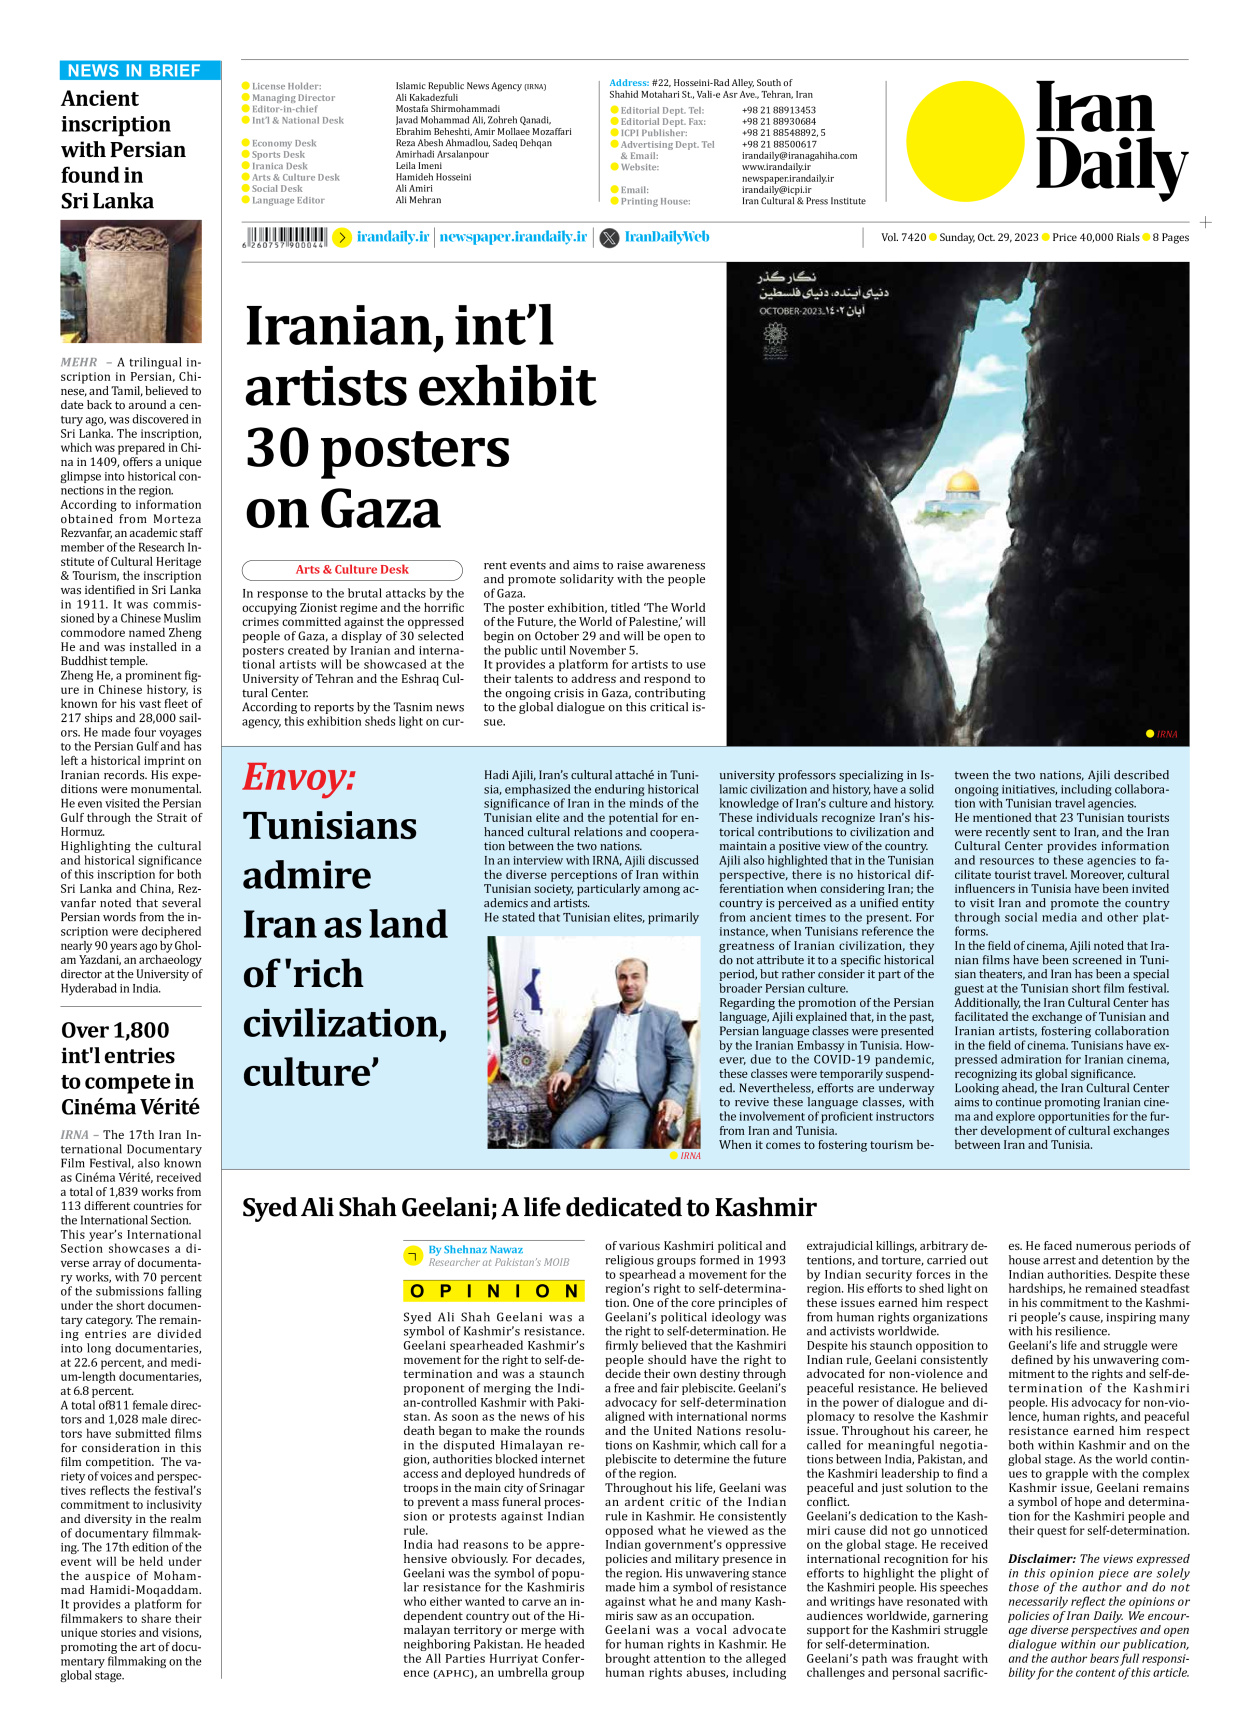 Iran Daily - Number Seven Thousand Four Hundred and Twenty - 29 October 2023 - Page 8